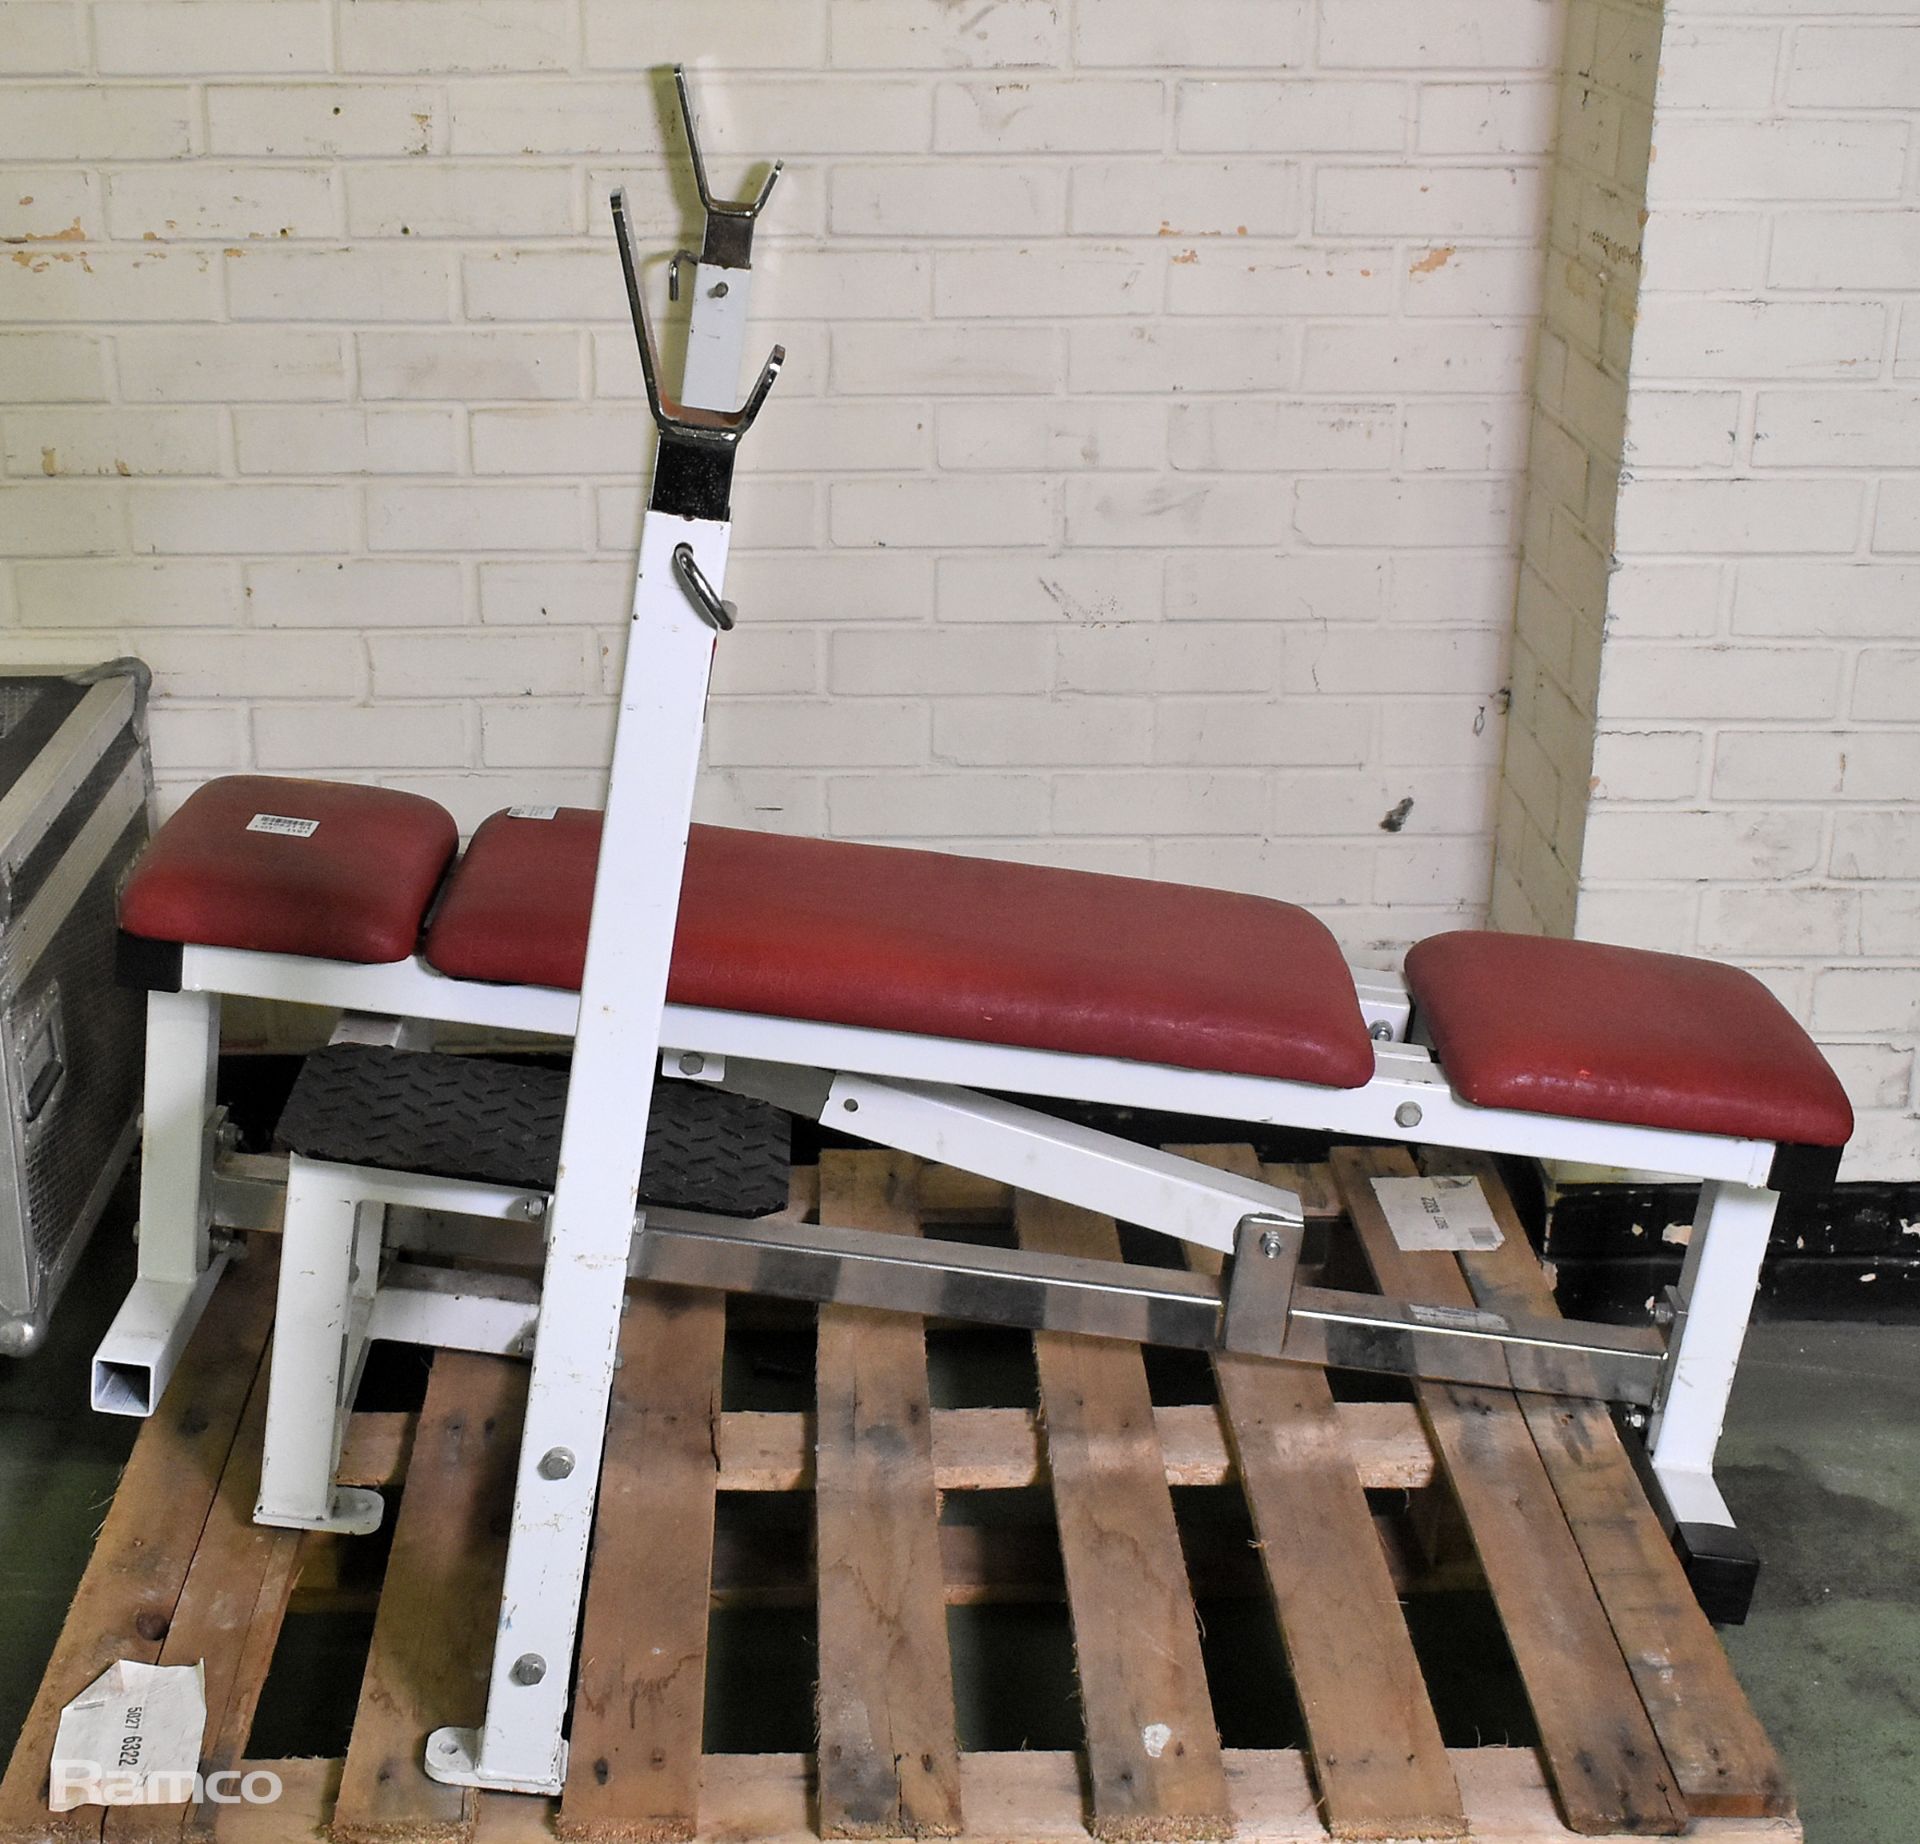 Powersport weight bench with barbell rack - W 1150 x D 1340 x H 1050mm